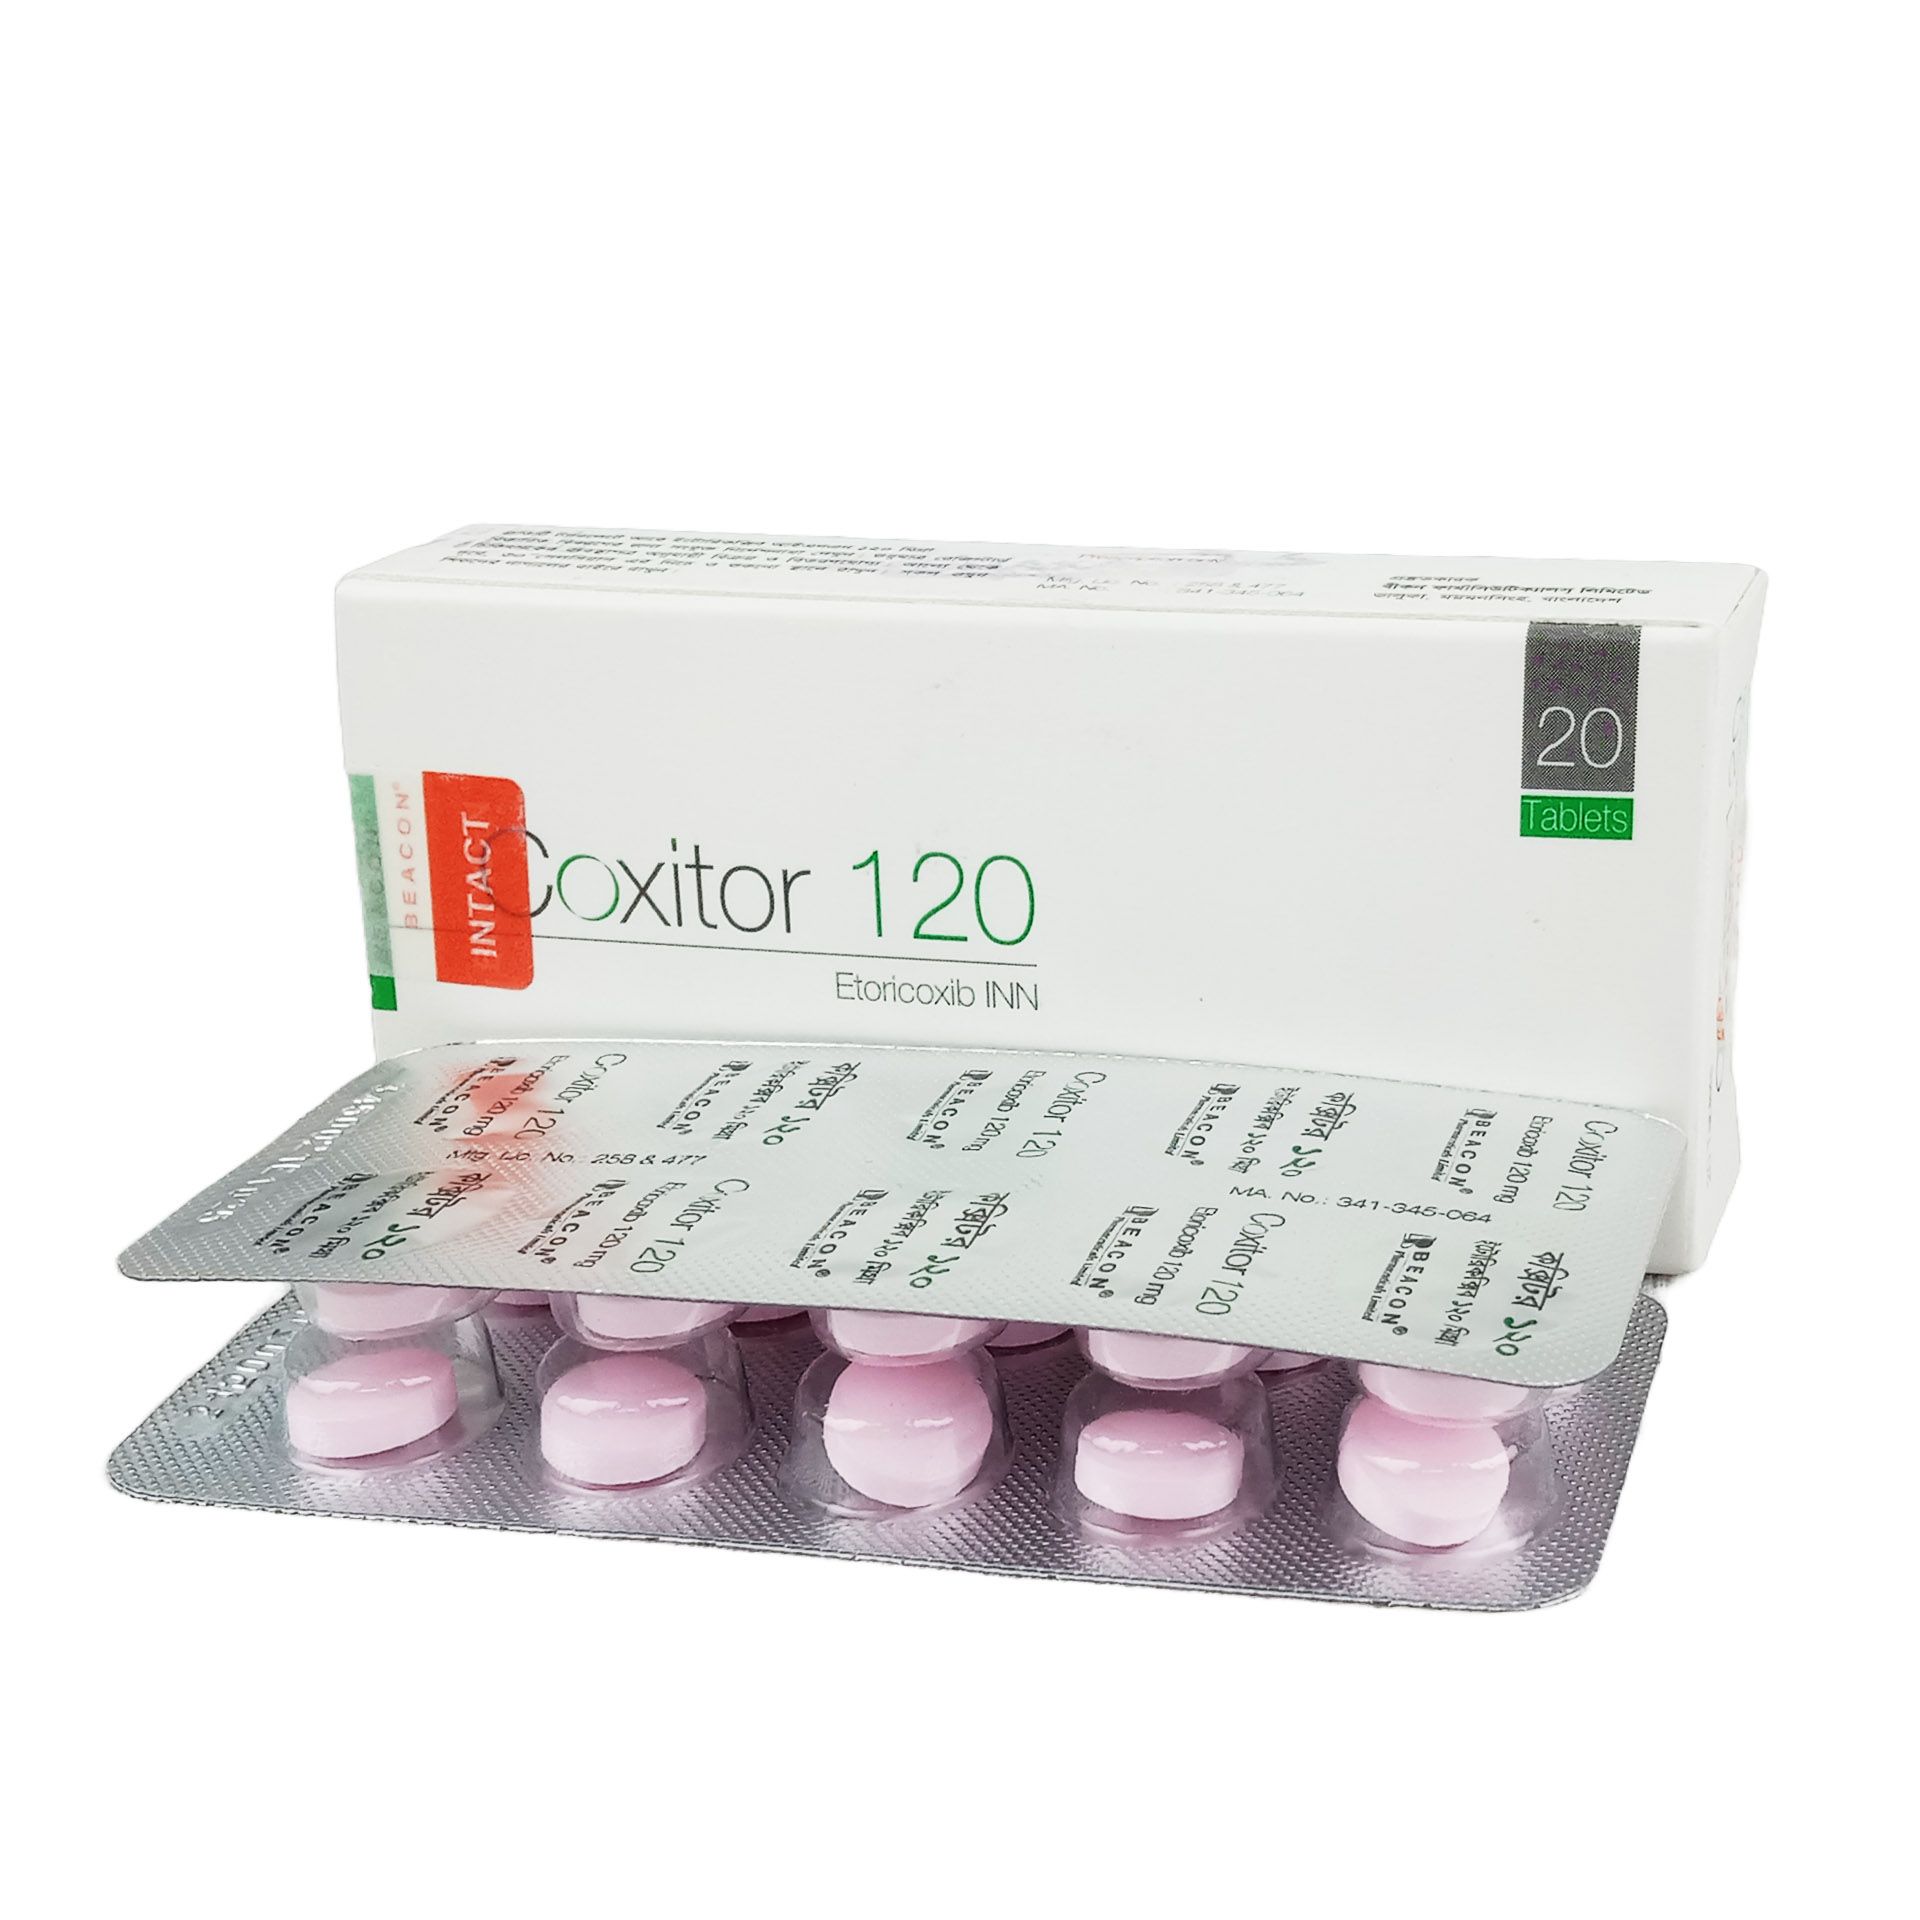 Coxitor 120mg Tablet